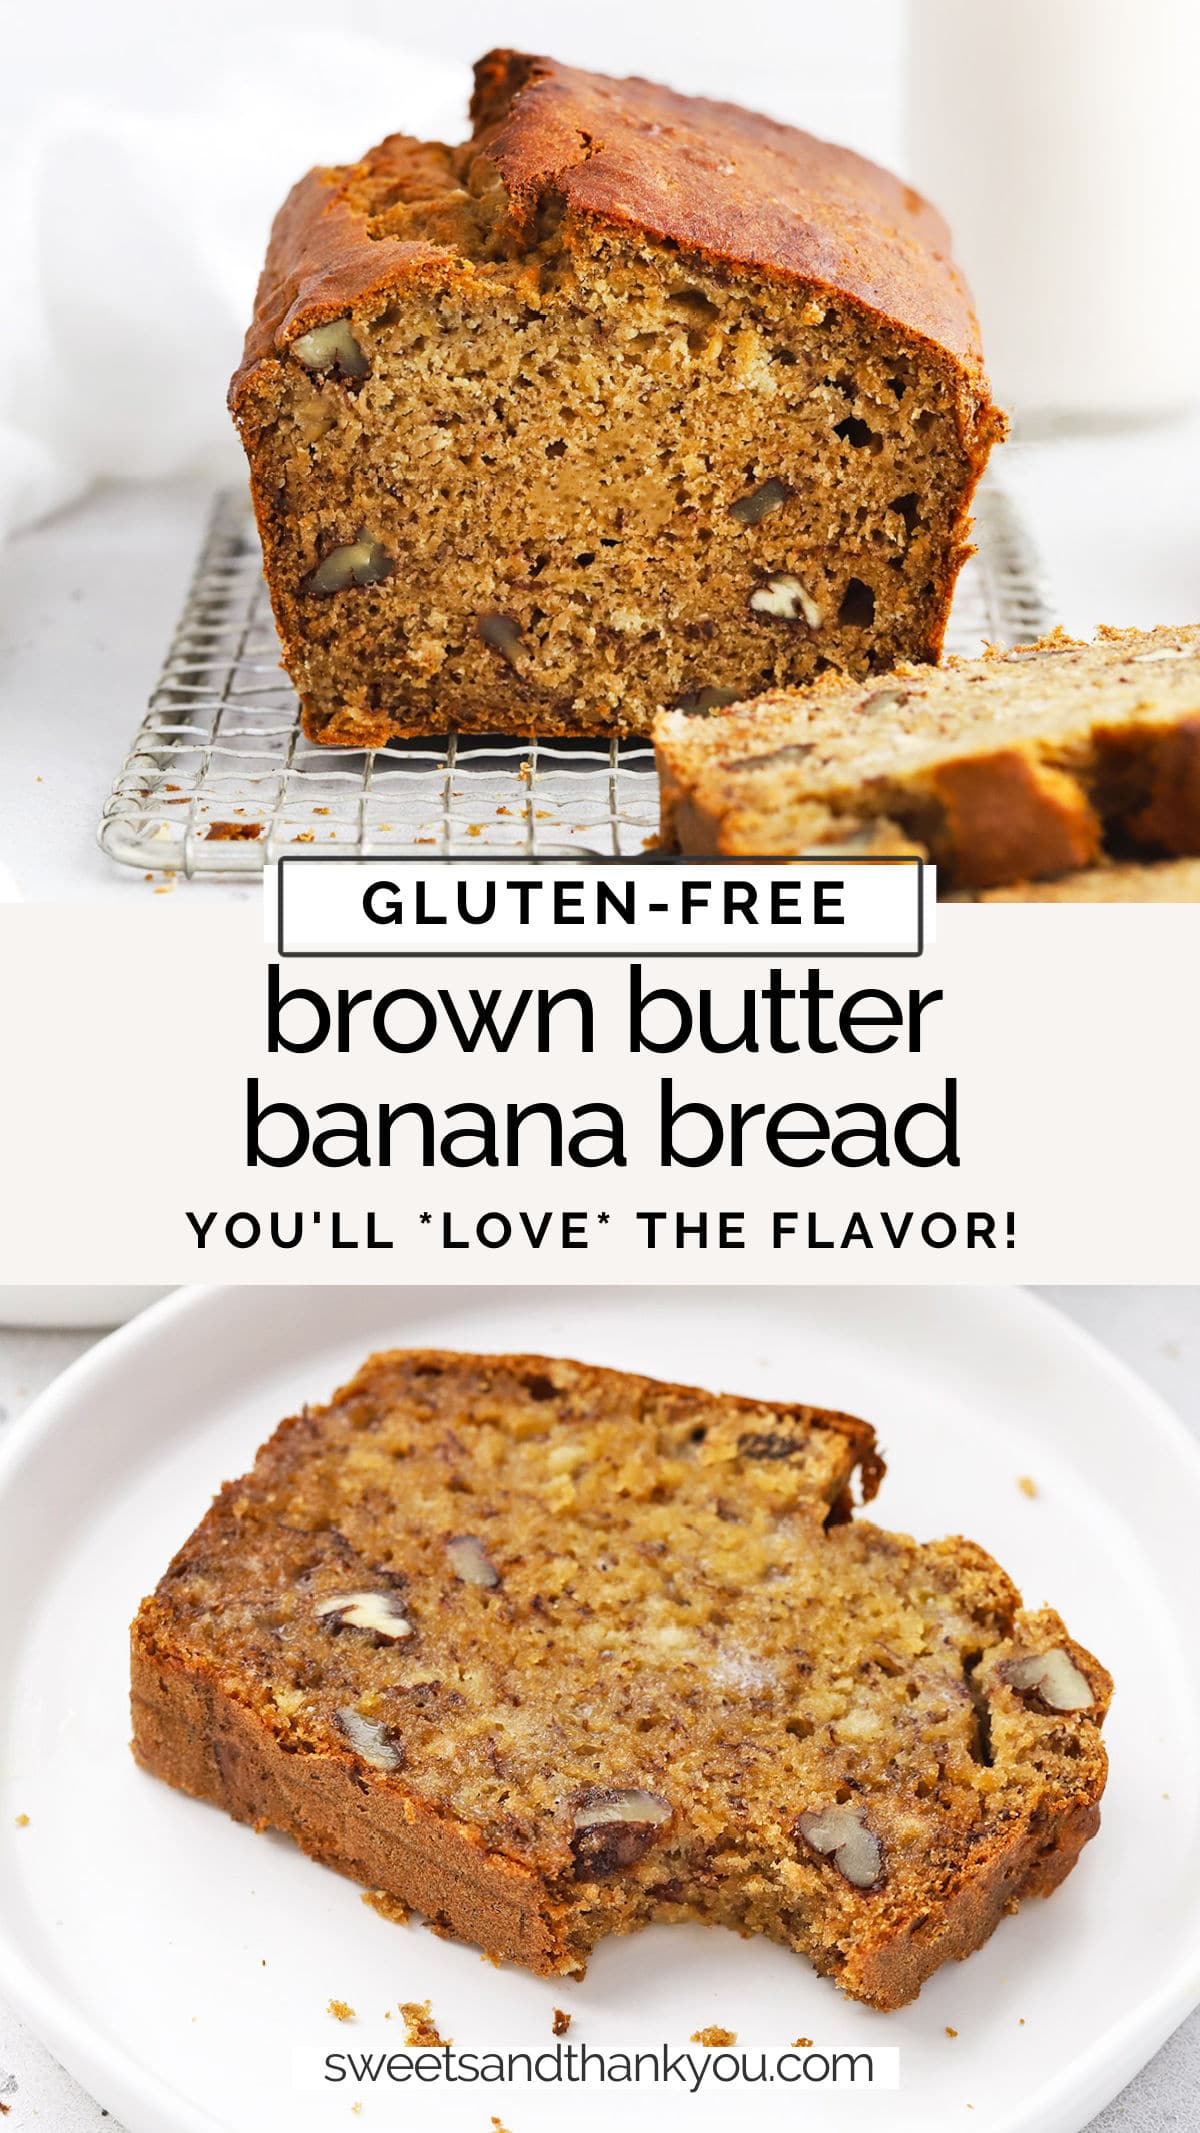 Gluten-Free Brown Butter Banana Bread - This amazing gluten-free banana bread recipe gives you tender, delicious banana bread every time. Laced with caramel-y flavors, it's delicious on its own, with nuts, or chocolate chips! // Brown Butter Banana Bread Recipe // Gluten Free Banana Bread // Sweets And Thank You Banana Bread Recipe // Gluten Free Browned Butter Banana Bread